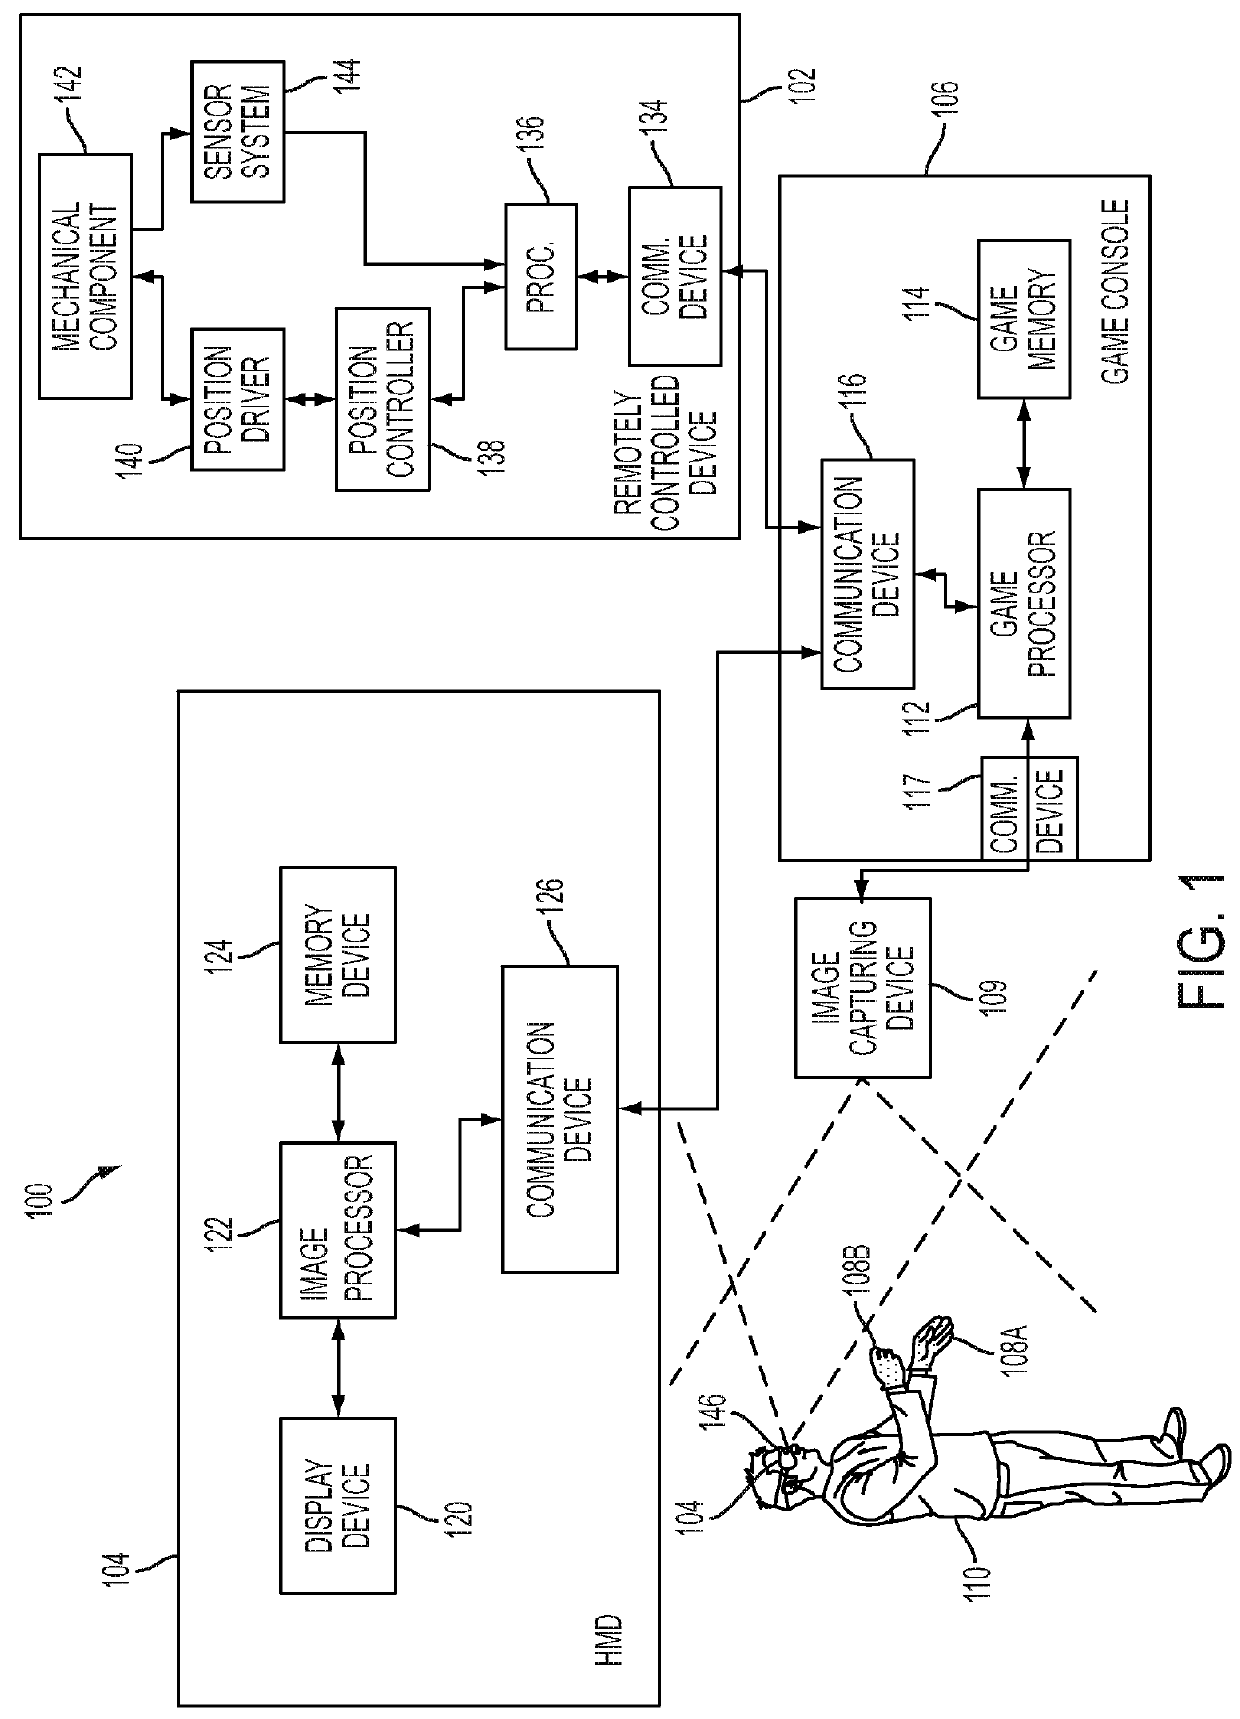 Systems and methods for providing feedback to a user while interacting with content